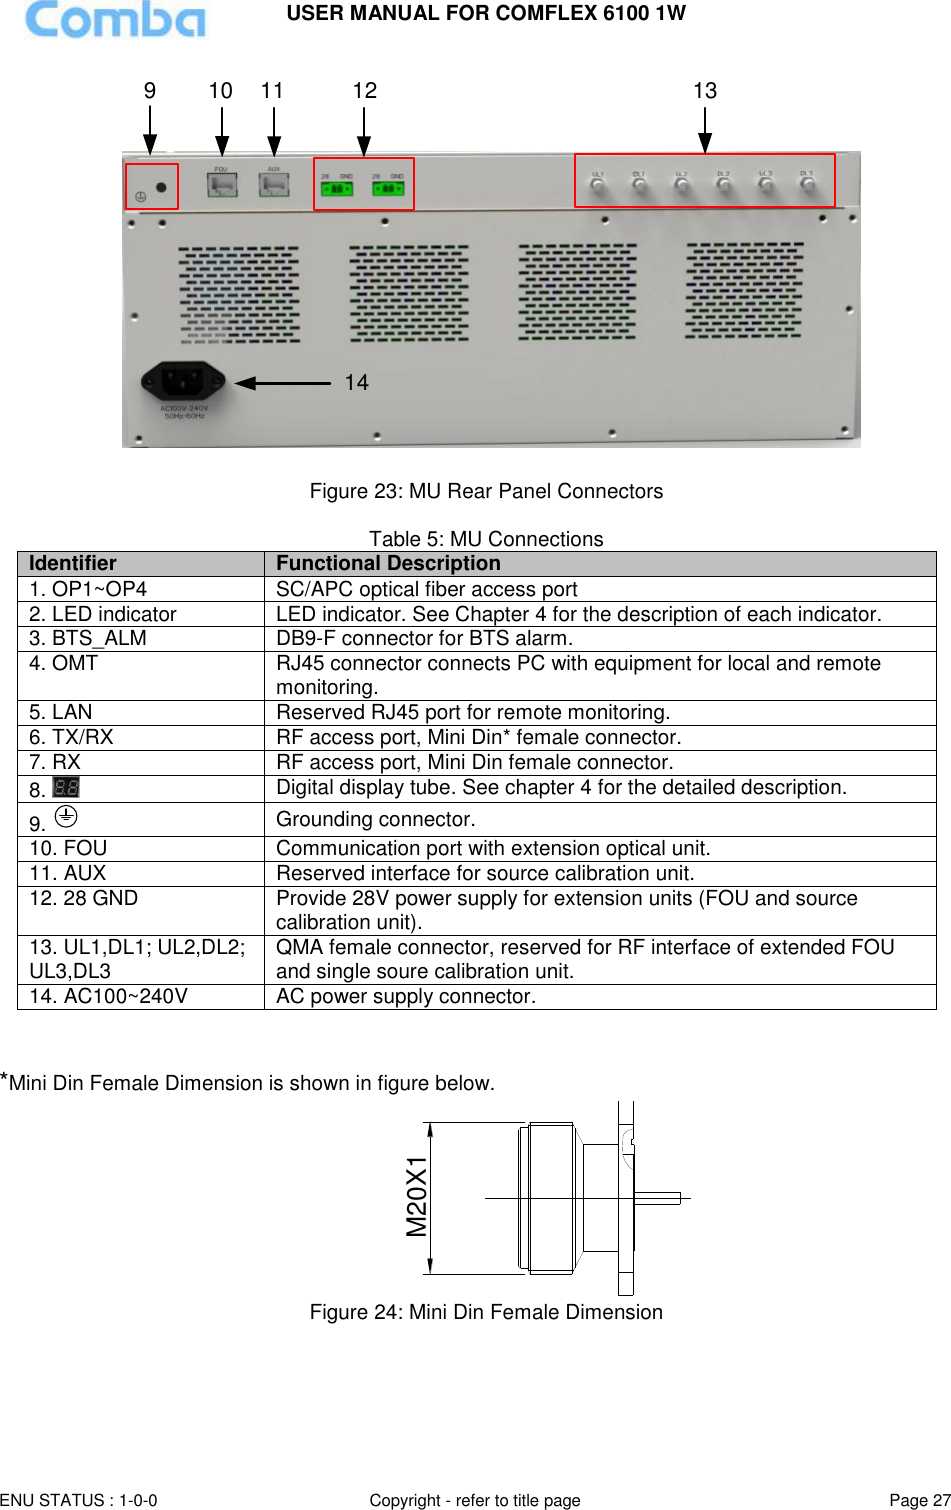 USER MANUAL FOR COMFLEX 6100 1W ENU STATUS : 1-0-0 Copyright - refer to title page Page 27  9 10 11 12 1314  Figure 23: MU Rear Panel Connectors  Table 5: MU Connections Identifier Functional Description 1. OP1~OP4 SC/APC optical fiber access port 2. LED indicator LED indicator. See Chapter 4 for the description of each indicator.  3. BTS_ALM DB9-F connector for BTS alarm. 4. OMT RJ45 connector connects PC with equipment for local and remote monitoring. 5. LAN Reserved RJ45 port for remote monitoring. 6. TX/RX RF access port, Mini Din* female connector. 7. RX RF access port, Mini Din female connector. 8.   Digital display tube. See chapter 4 for the detailed description. 9.   Grounding connector. 10. FOU Communication port with extension optical unit. 11. AUX Reserved interface for source calibration unit. 12. 28 GND Provide 28V power supply for extension units (FOU and source calibration unit). 13. UL1,DL1; UL2,DL2; UL3,DL3 QMA female connector, reserved for RF interface of extended FOU and single soure calibration unit.  14. AC100~240V AC power supply connector.   *Mini Din Female Dimension is shown in figure below. M20X1 Figure 24: Mini Din Female Dimension  